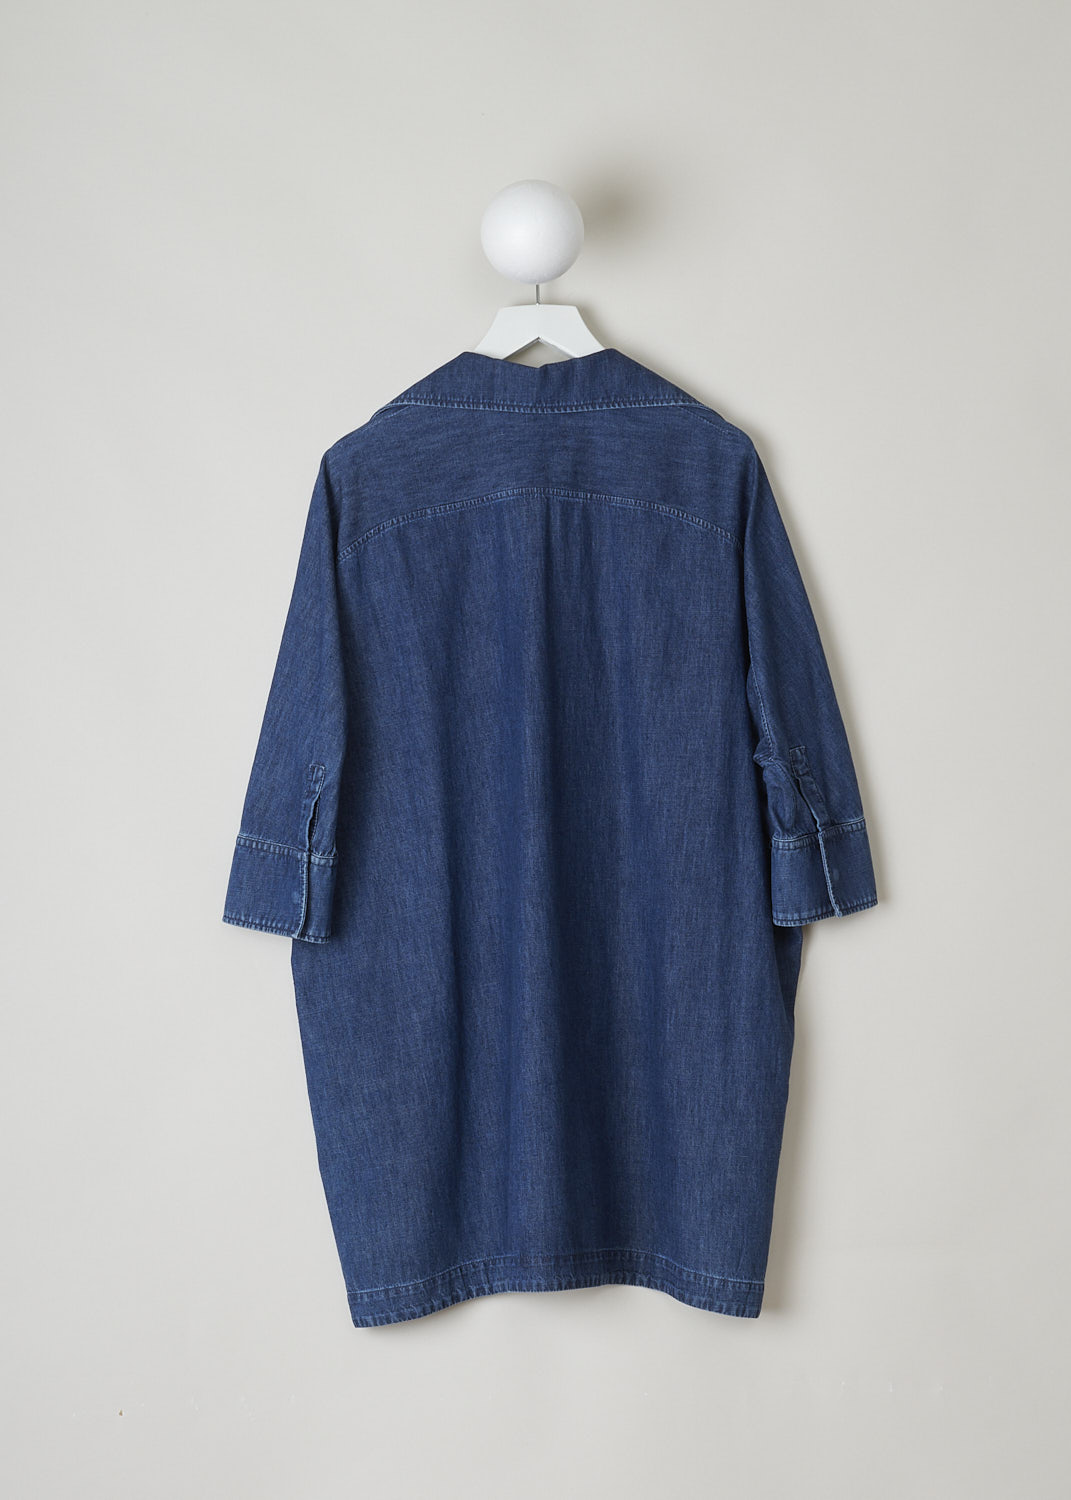 VALENTINO, DARK WASH DENIM TUNIC, XB3DB01I433_558XB3DB01I433_558, Blue, Back, This wide tunic in a darker wash jean fabric has a spread collar with a V-neckline. The end of the V-neck is decorated with the brands signature V. The tunic has three-quarter raglan sleeves with buttoned cuffs. Slanted pockets can be found concealed in the side seams. The tunic has an asymmetrical finish, meaning the back is a little longer than the front. Small slits can be found on either side. 
